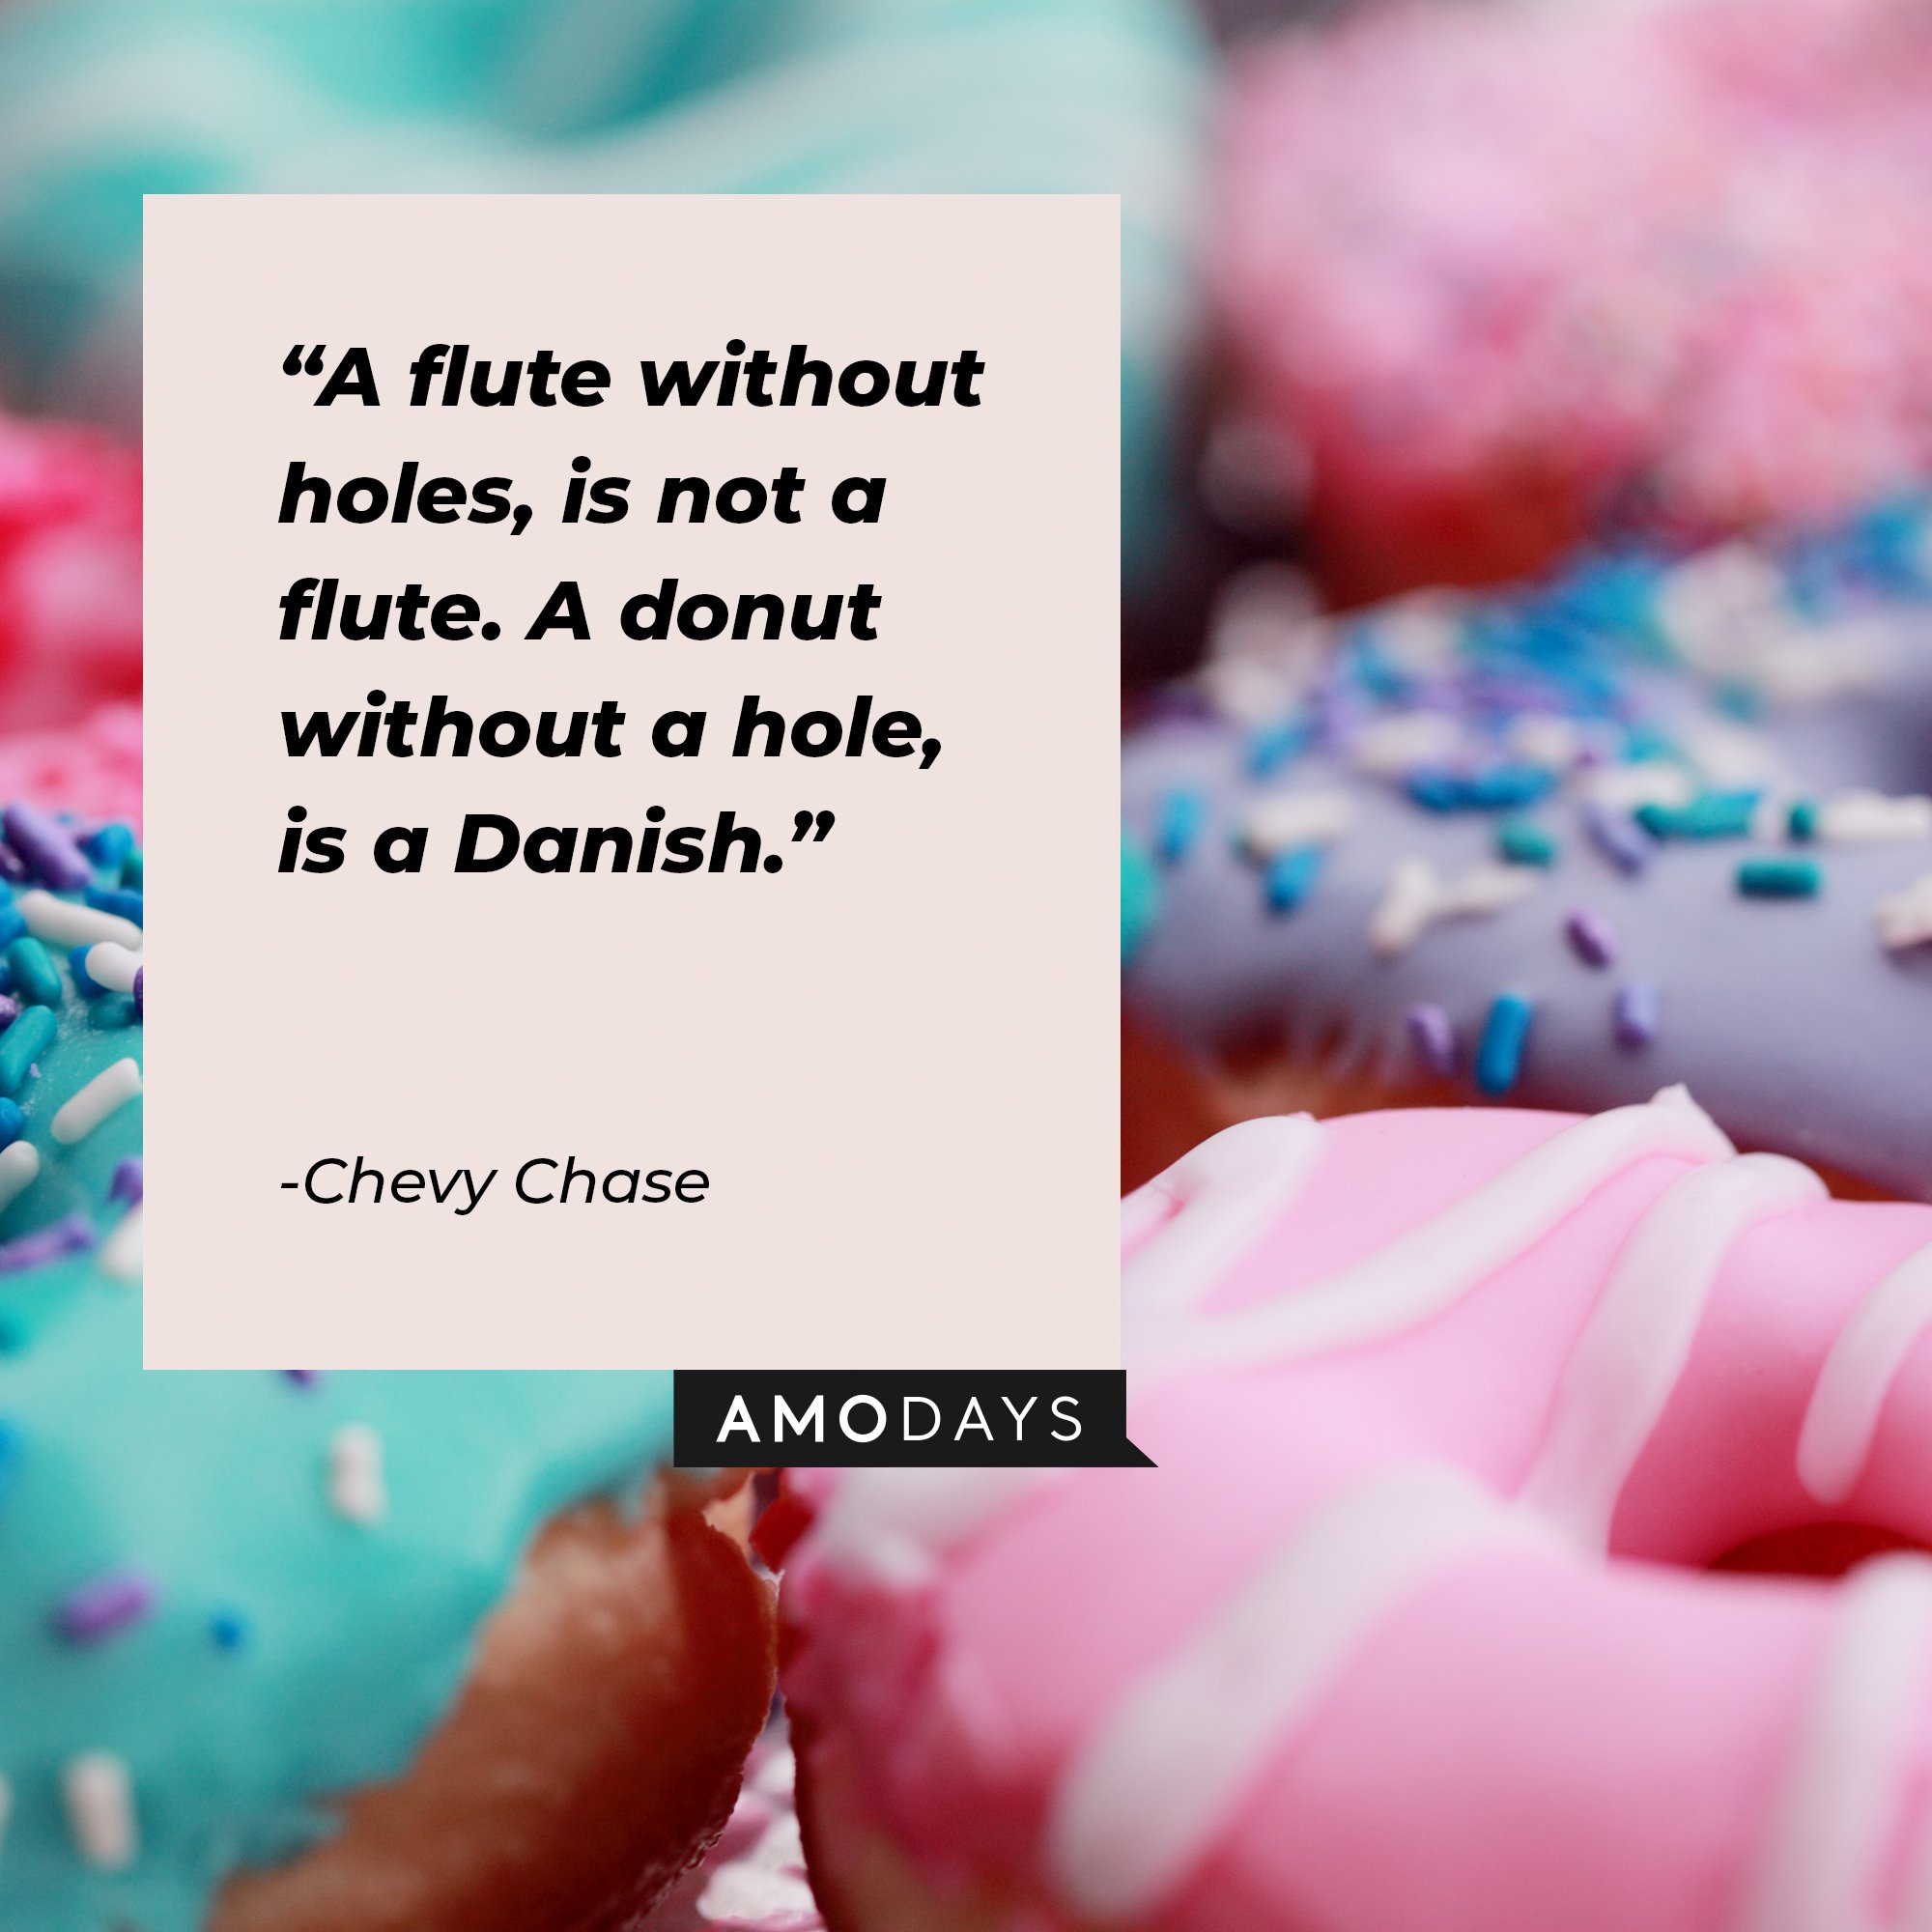 Chevy Chase's quote: "A flute without holes, is not a flute. A donut without a hole, is a Danish." | Image: AmoDays